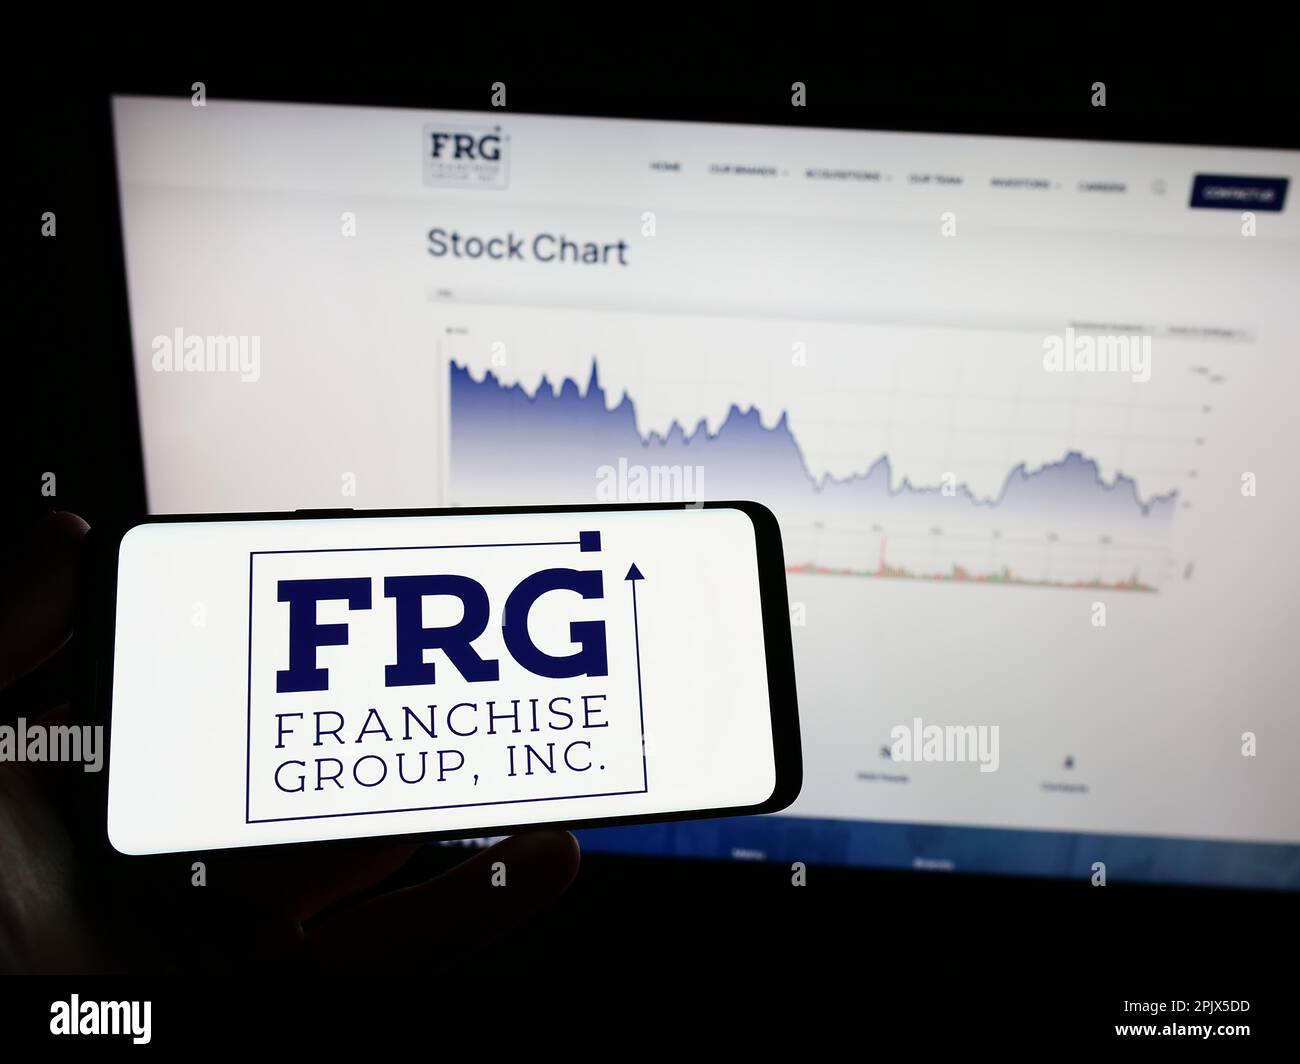 Person holding mobile phone with logo of American company Franchise Group Inc. (FRG) on screen in front of web page. Focus on phone display. Stock Photo